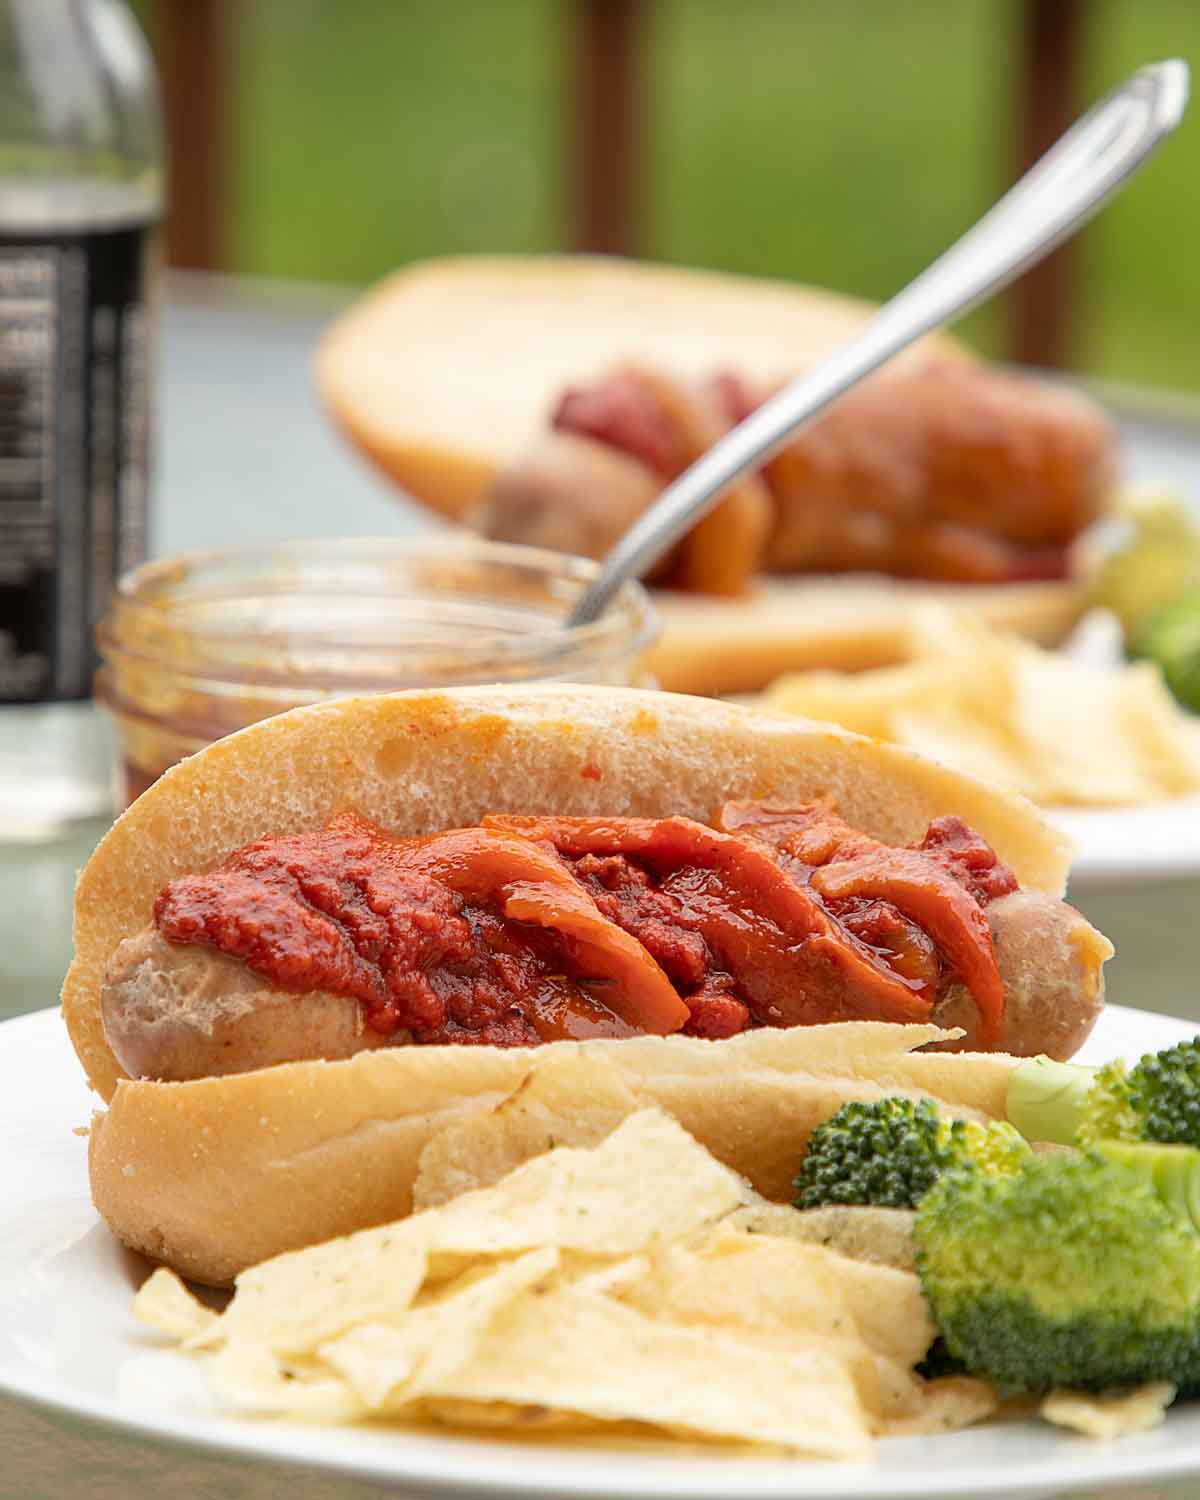 Italian Sausage Sandwiches are delicious topped with pizza sauce and peppers. And super easy, whether you go with commercial sausages or homemade.